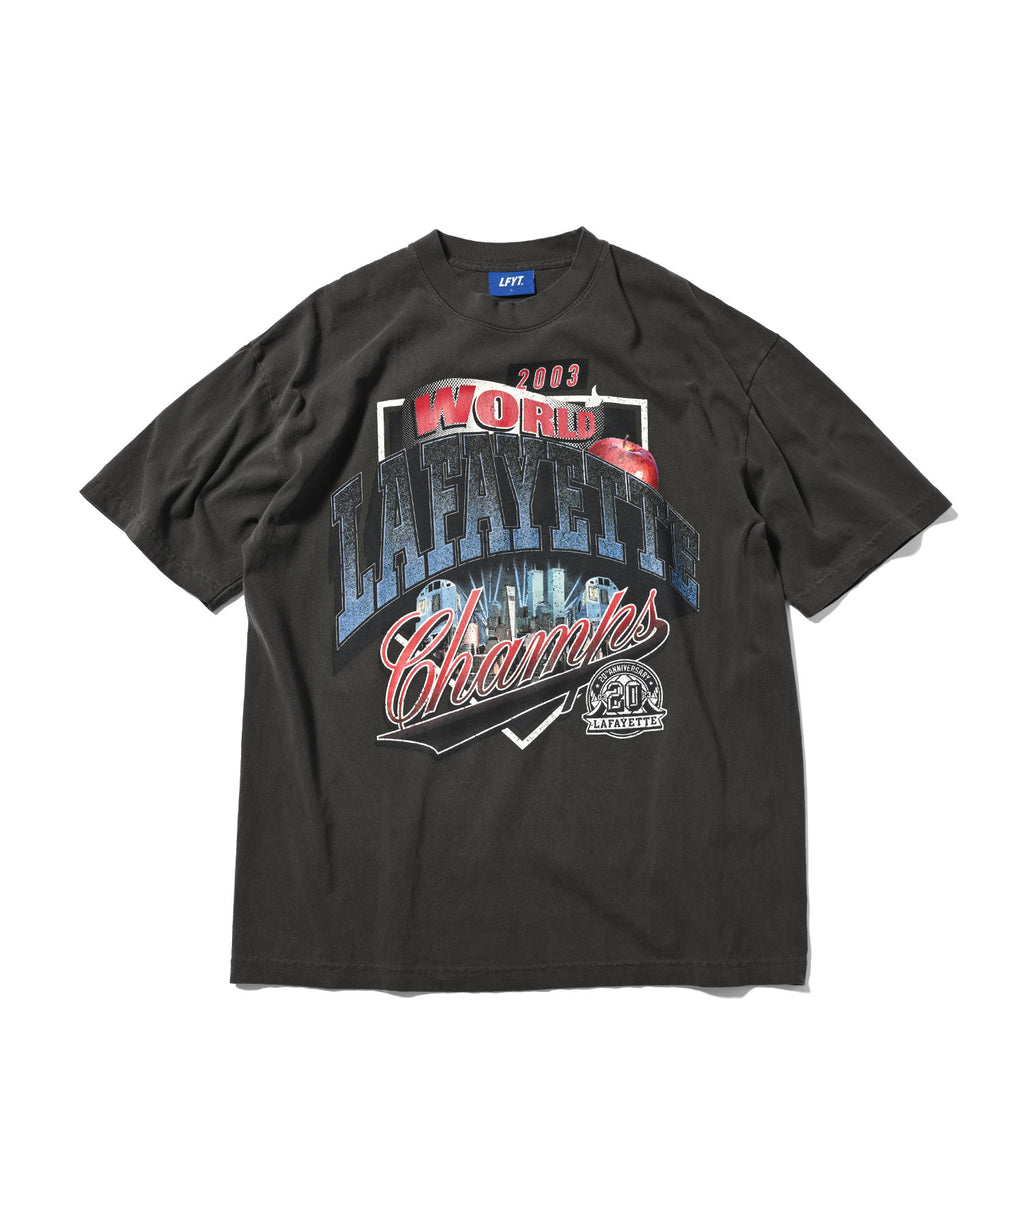 LFYT WORLD CHAMPS TEE TYPE 3 -VINTAGE EDITION- LS230116